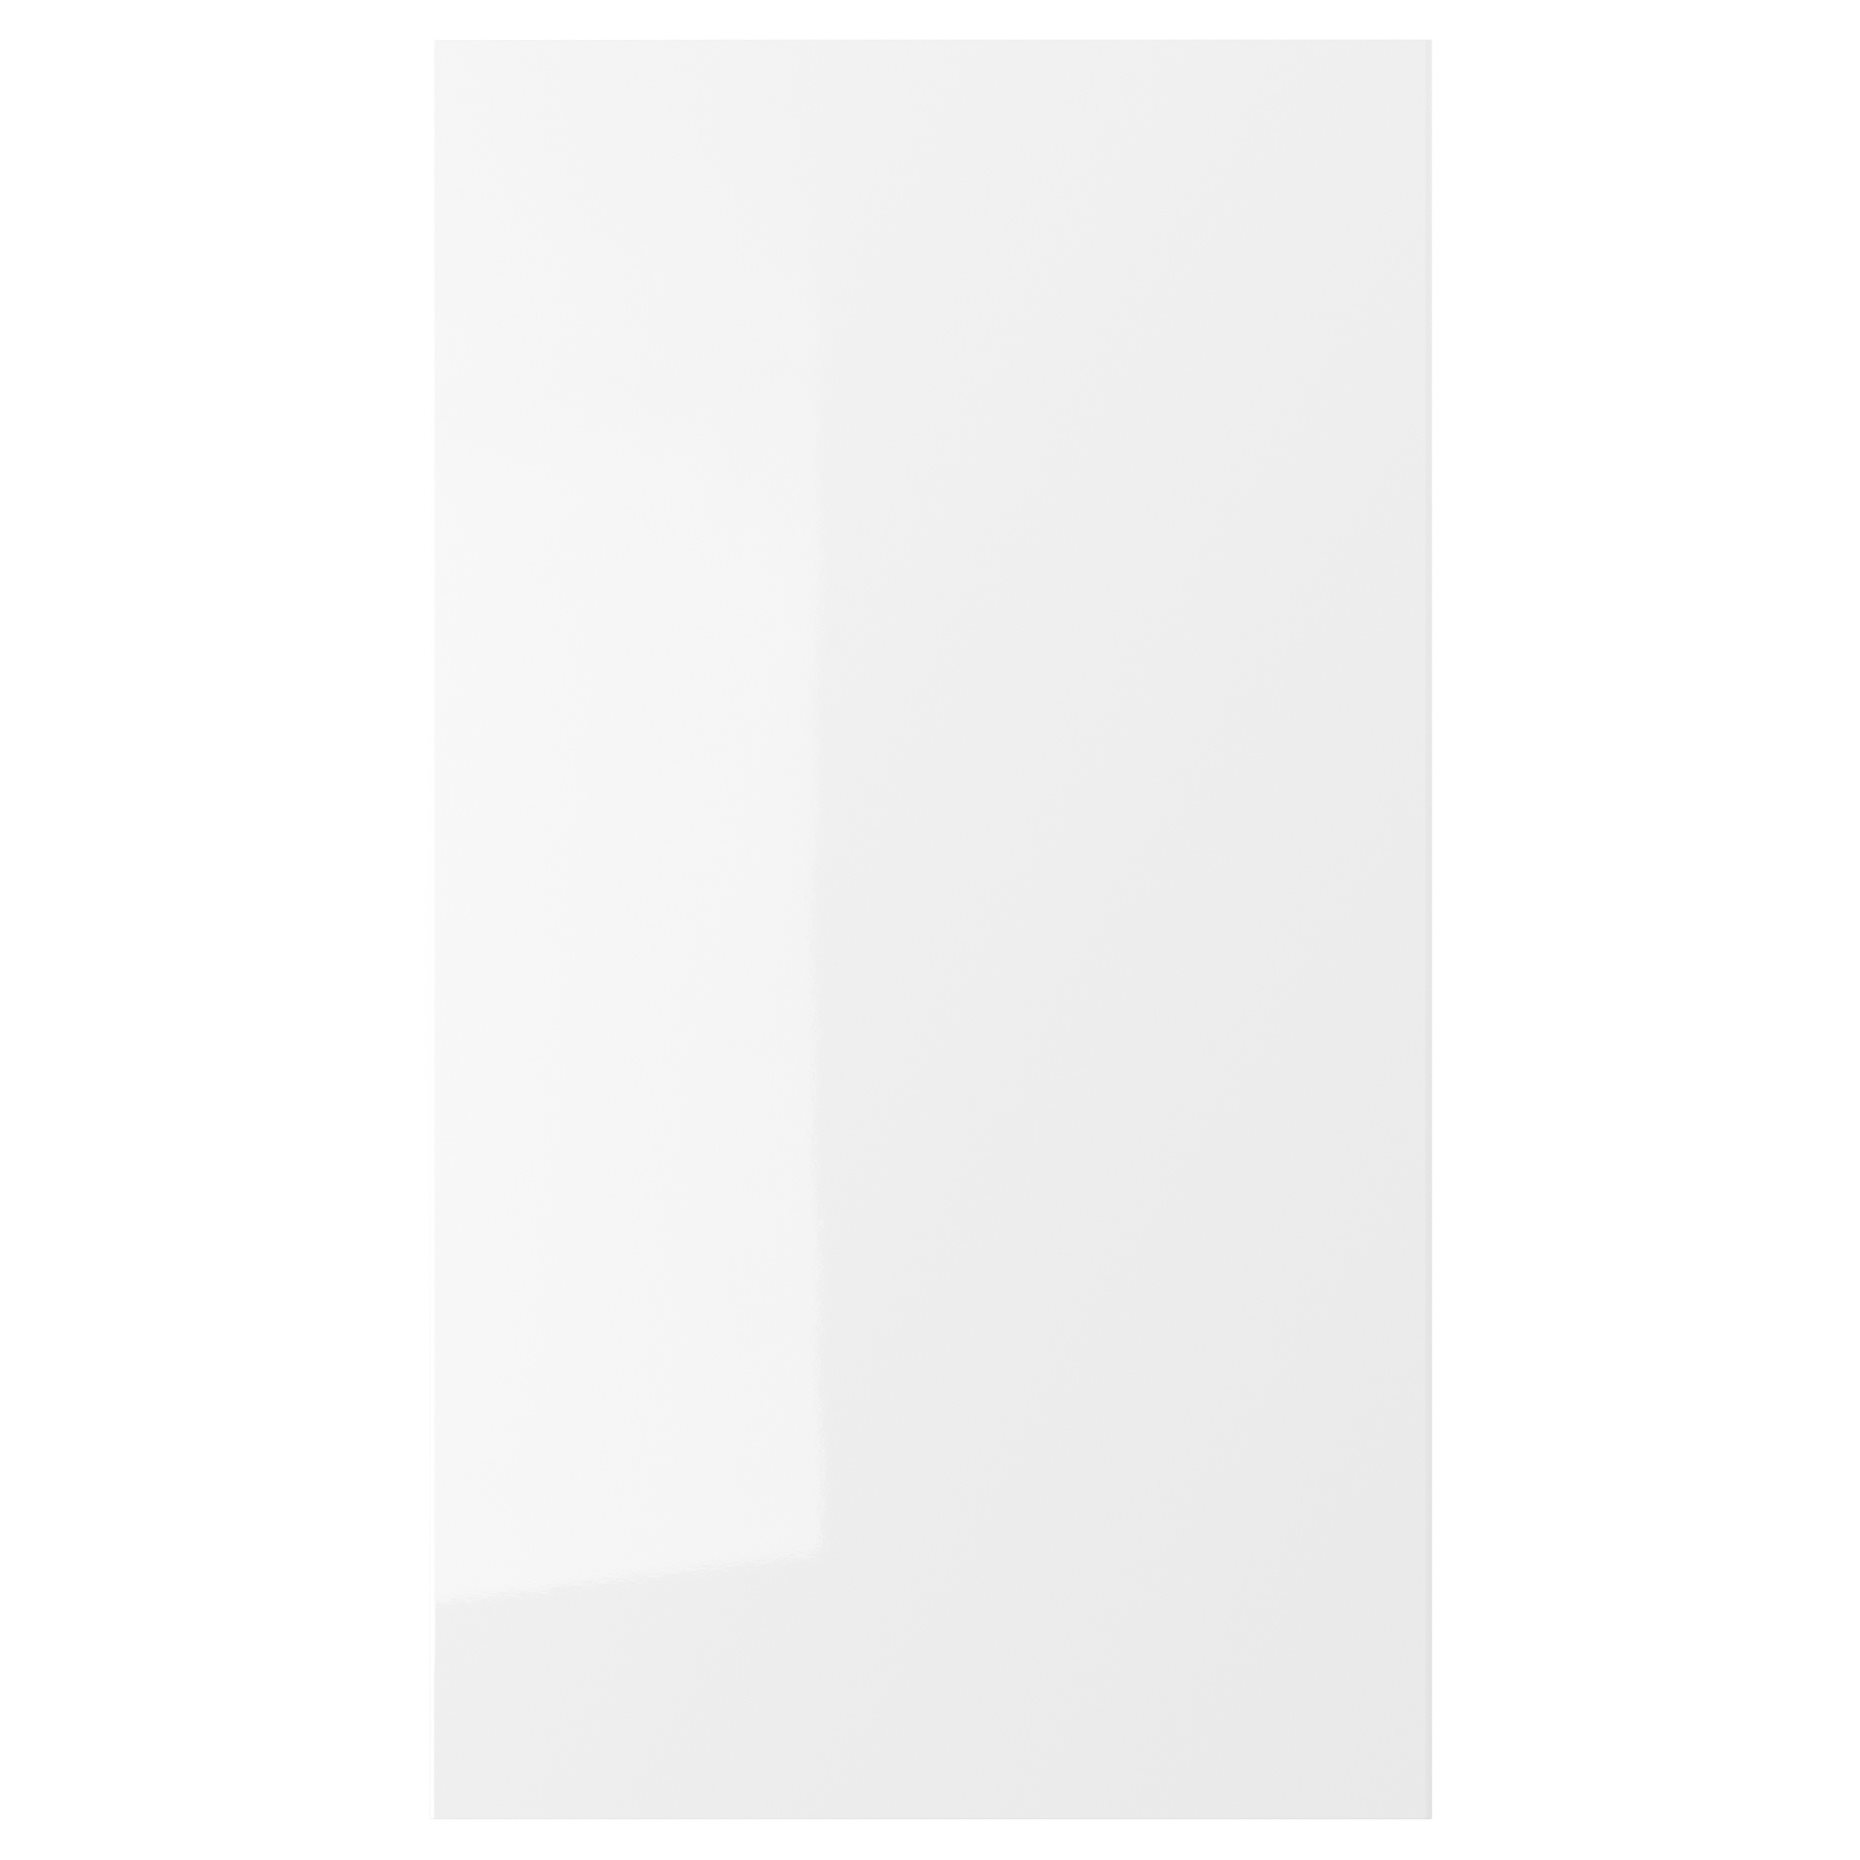 RINGHULT, front for dishwasher high-gloss, 45x80 cm, 802.462.96